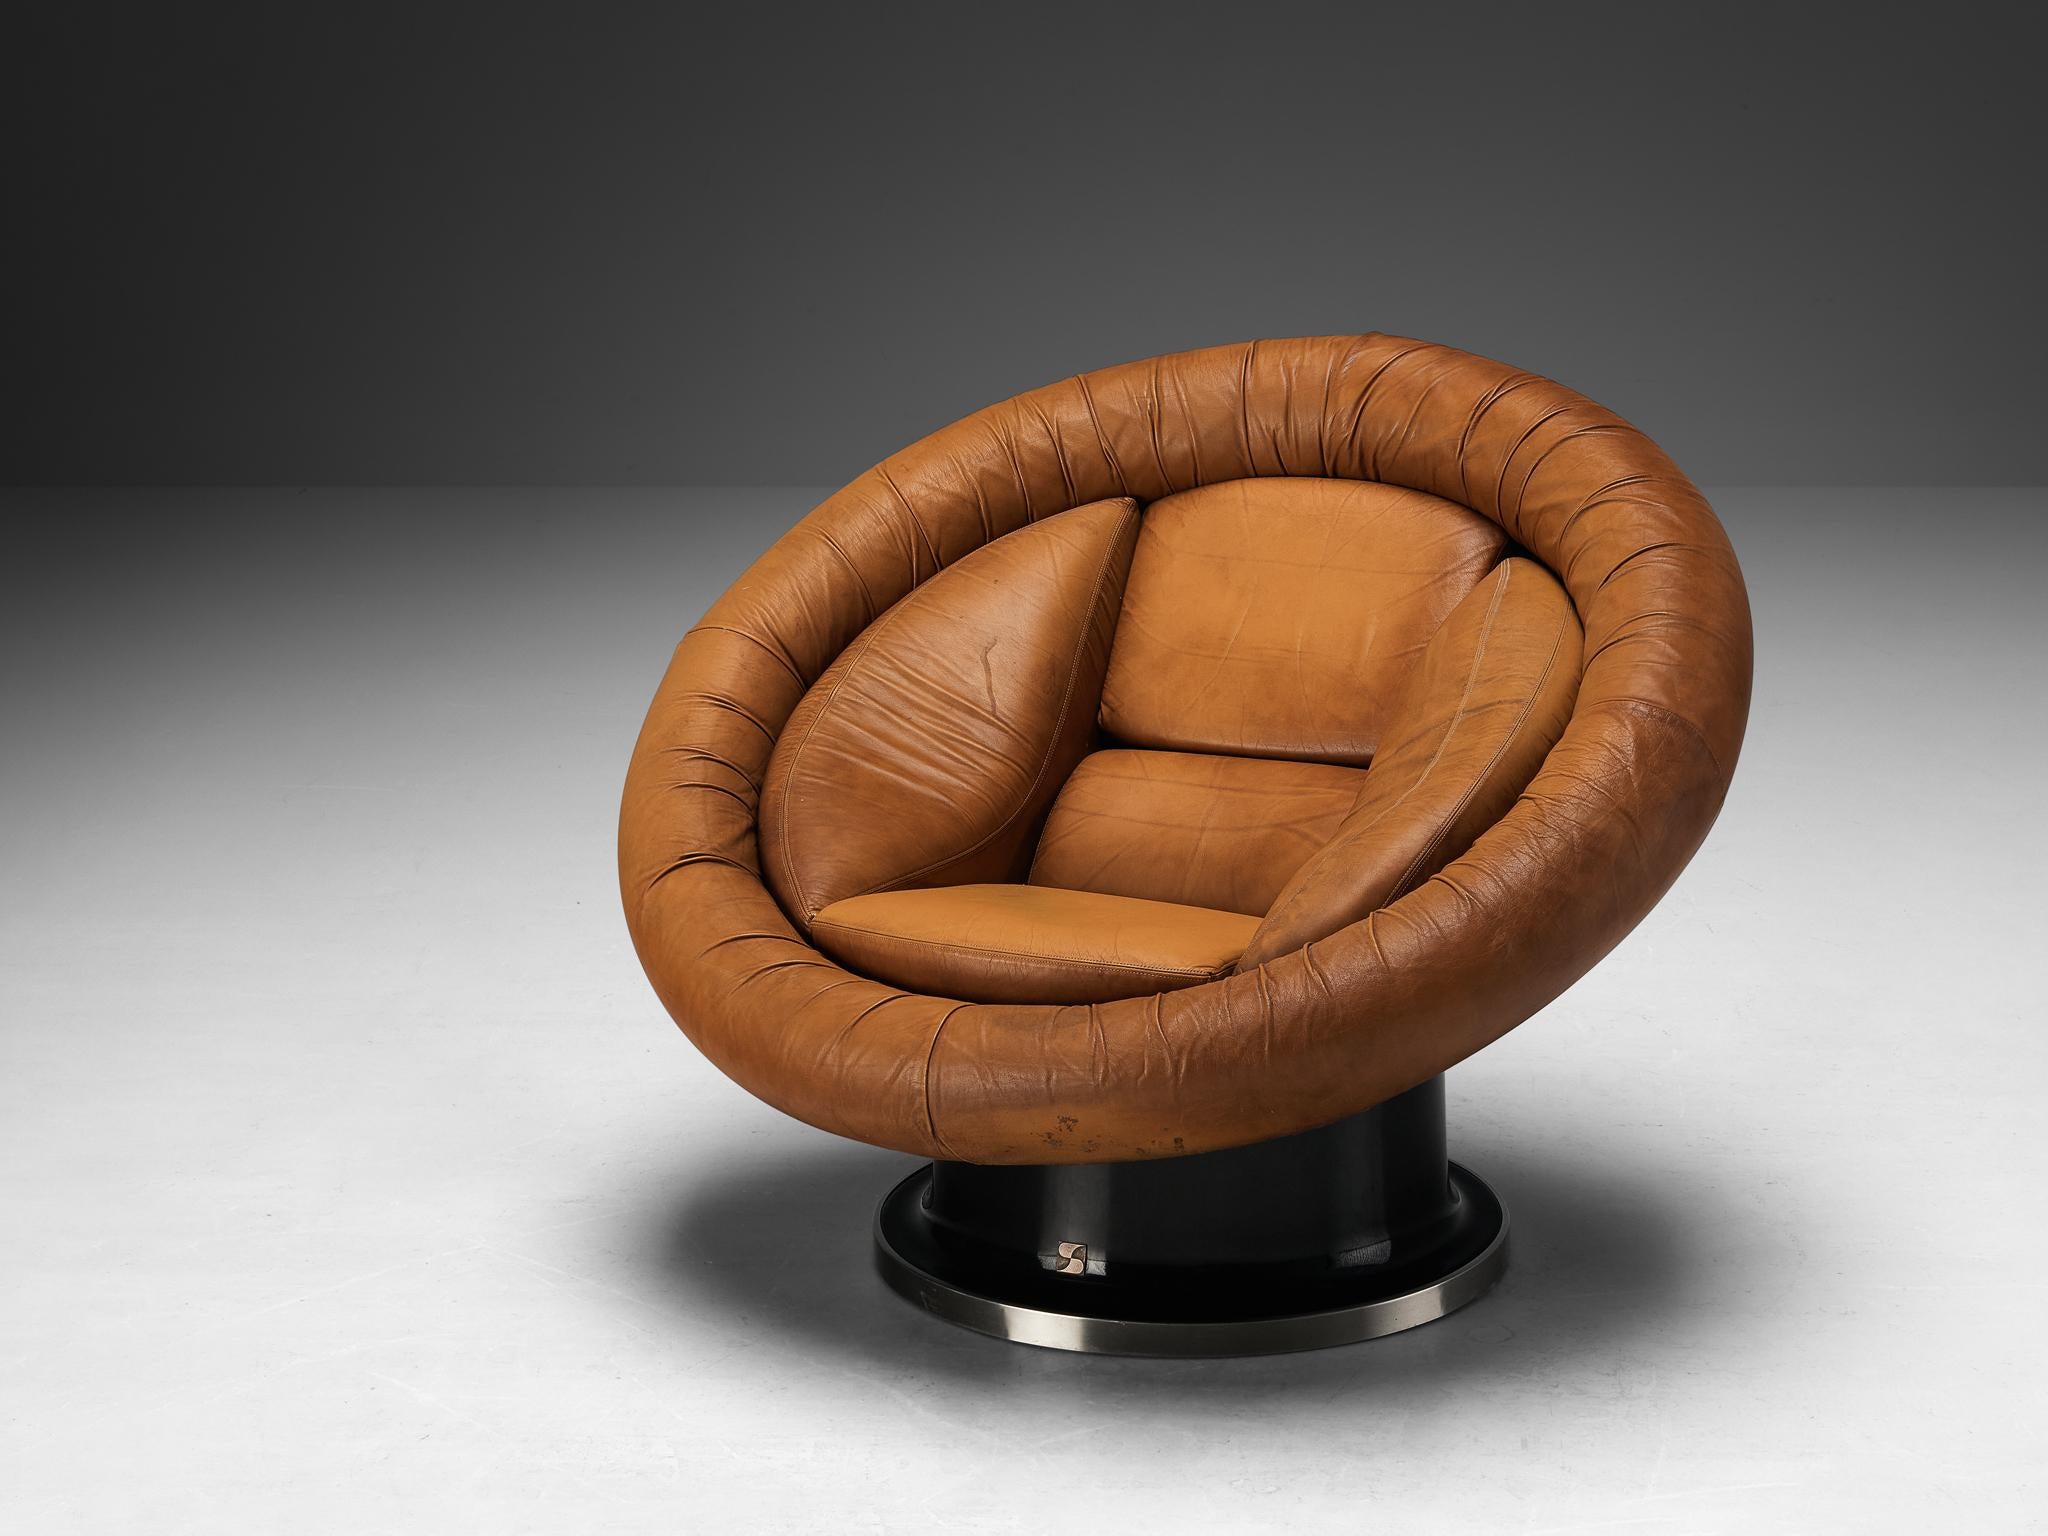 Saporiti, lounge chair, fiberglass, leather, metal, Italy, 1970s

A splendid space age design by Saporiti made in the 1970s. Envisioned with a splendid fusion of sophistication and comfort, this lounge chair boasts an exquisite marriage of materials